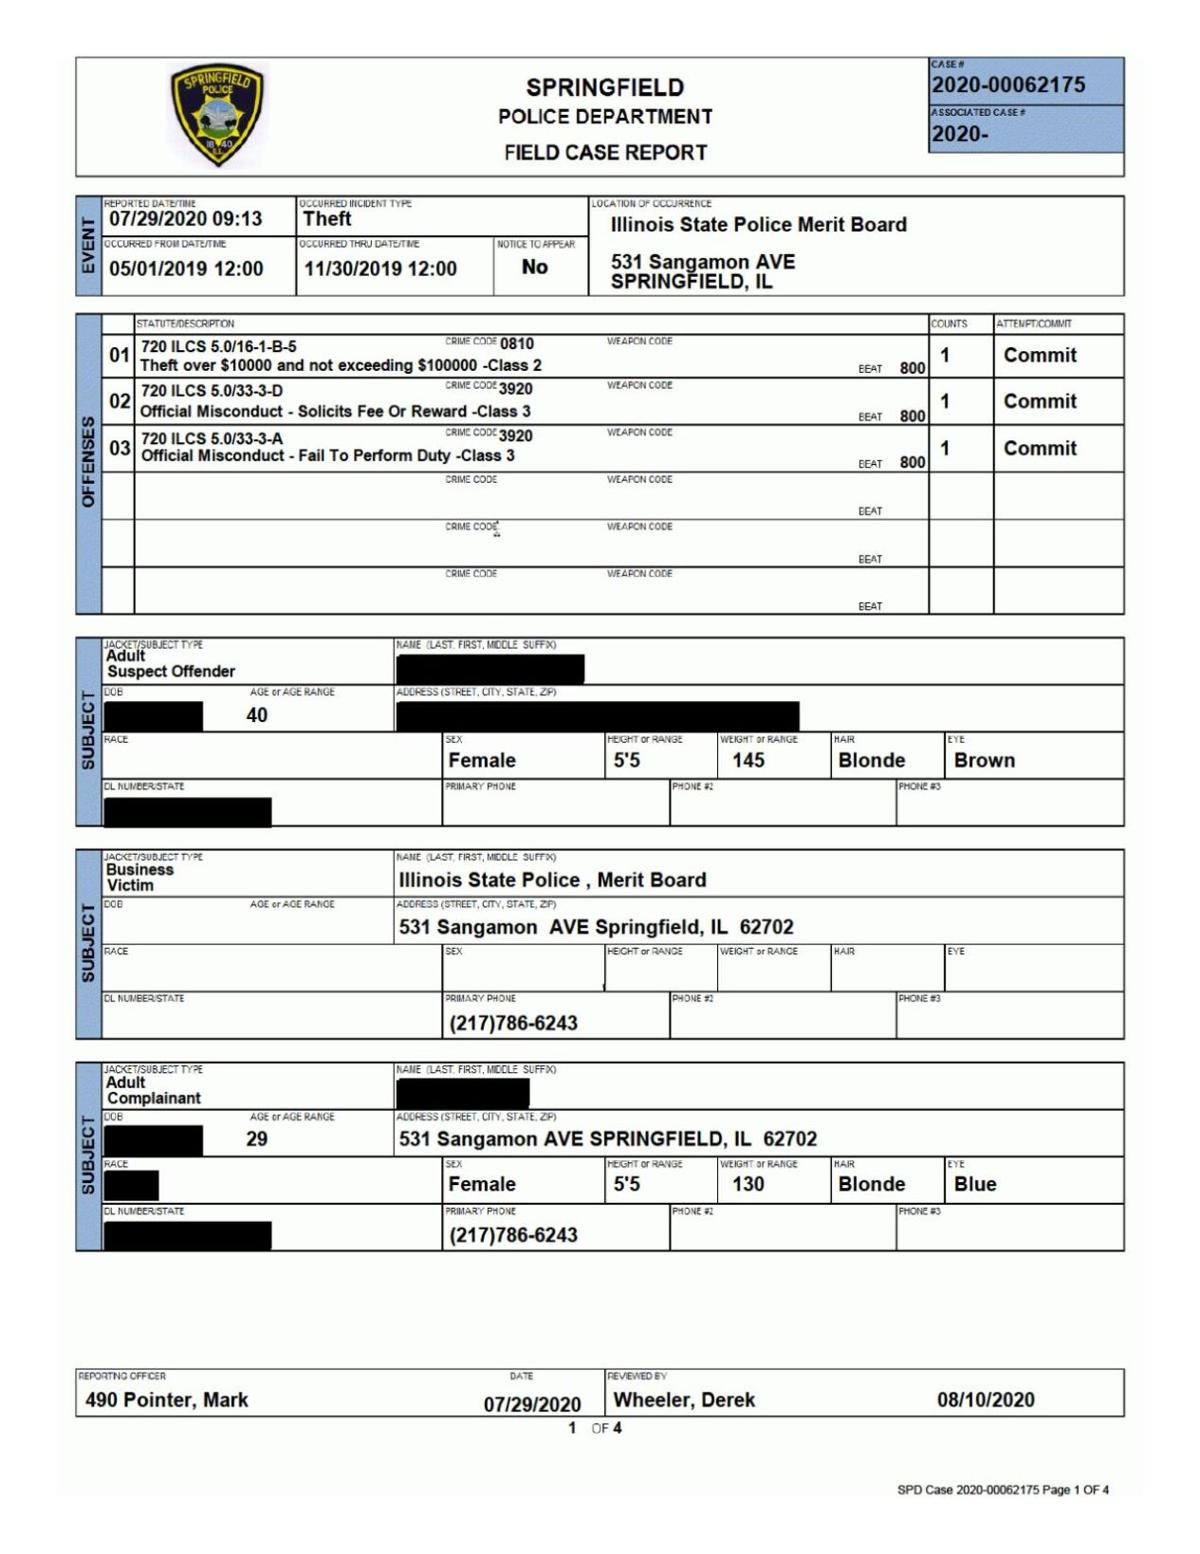 Springfield Police Report number S20-62175